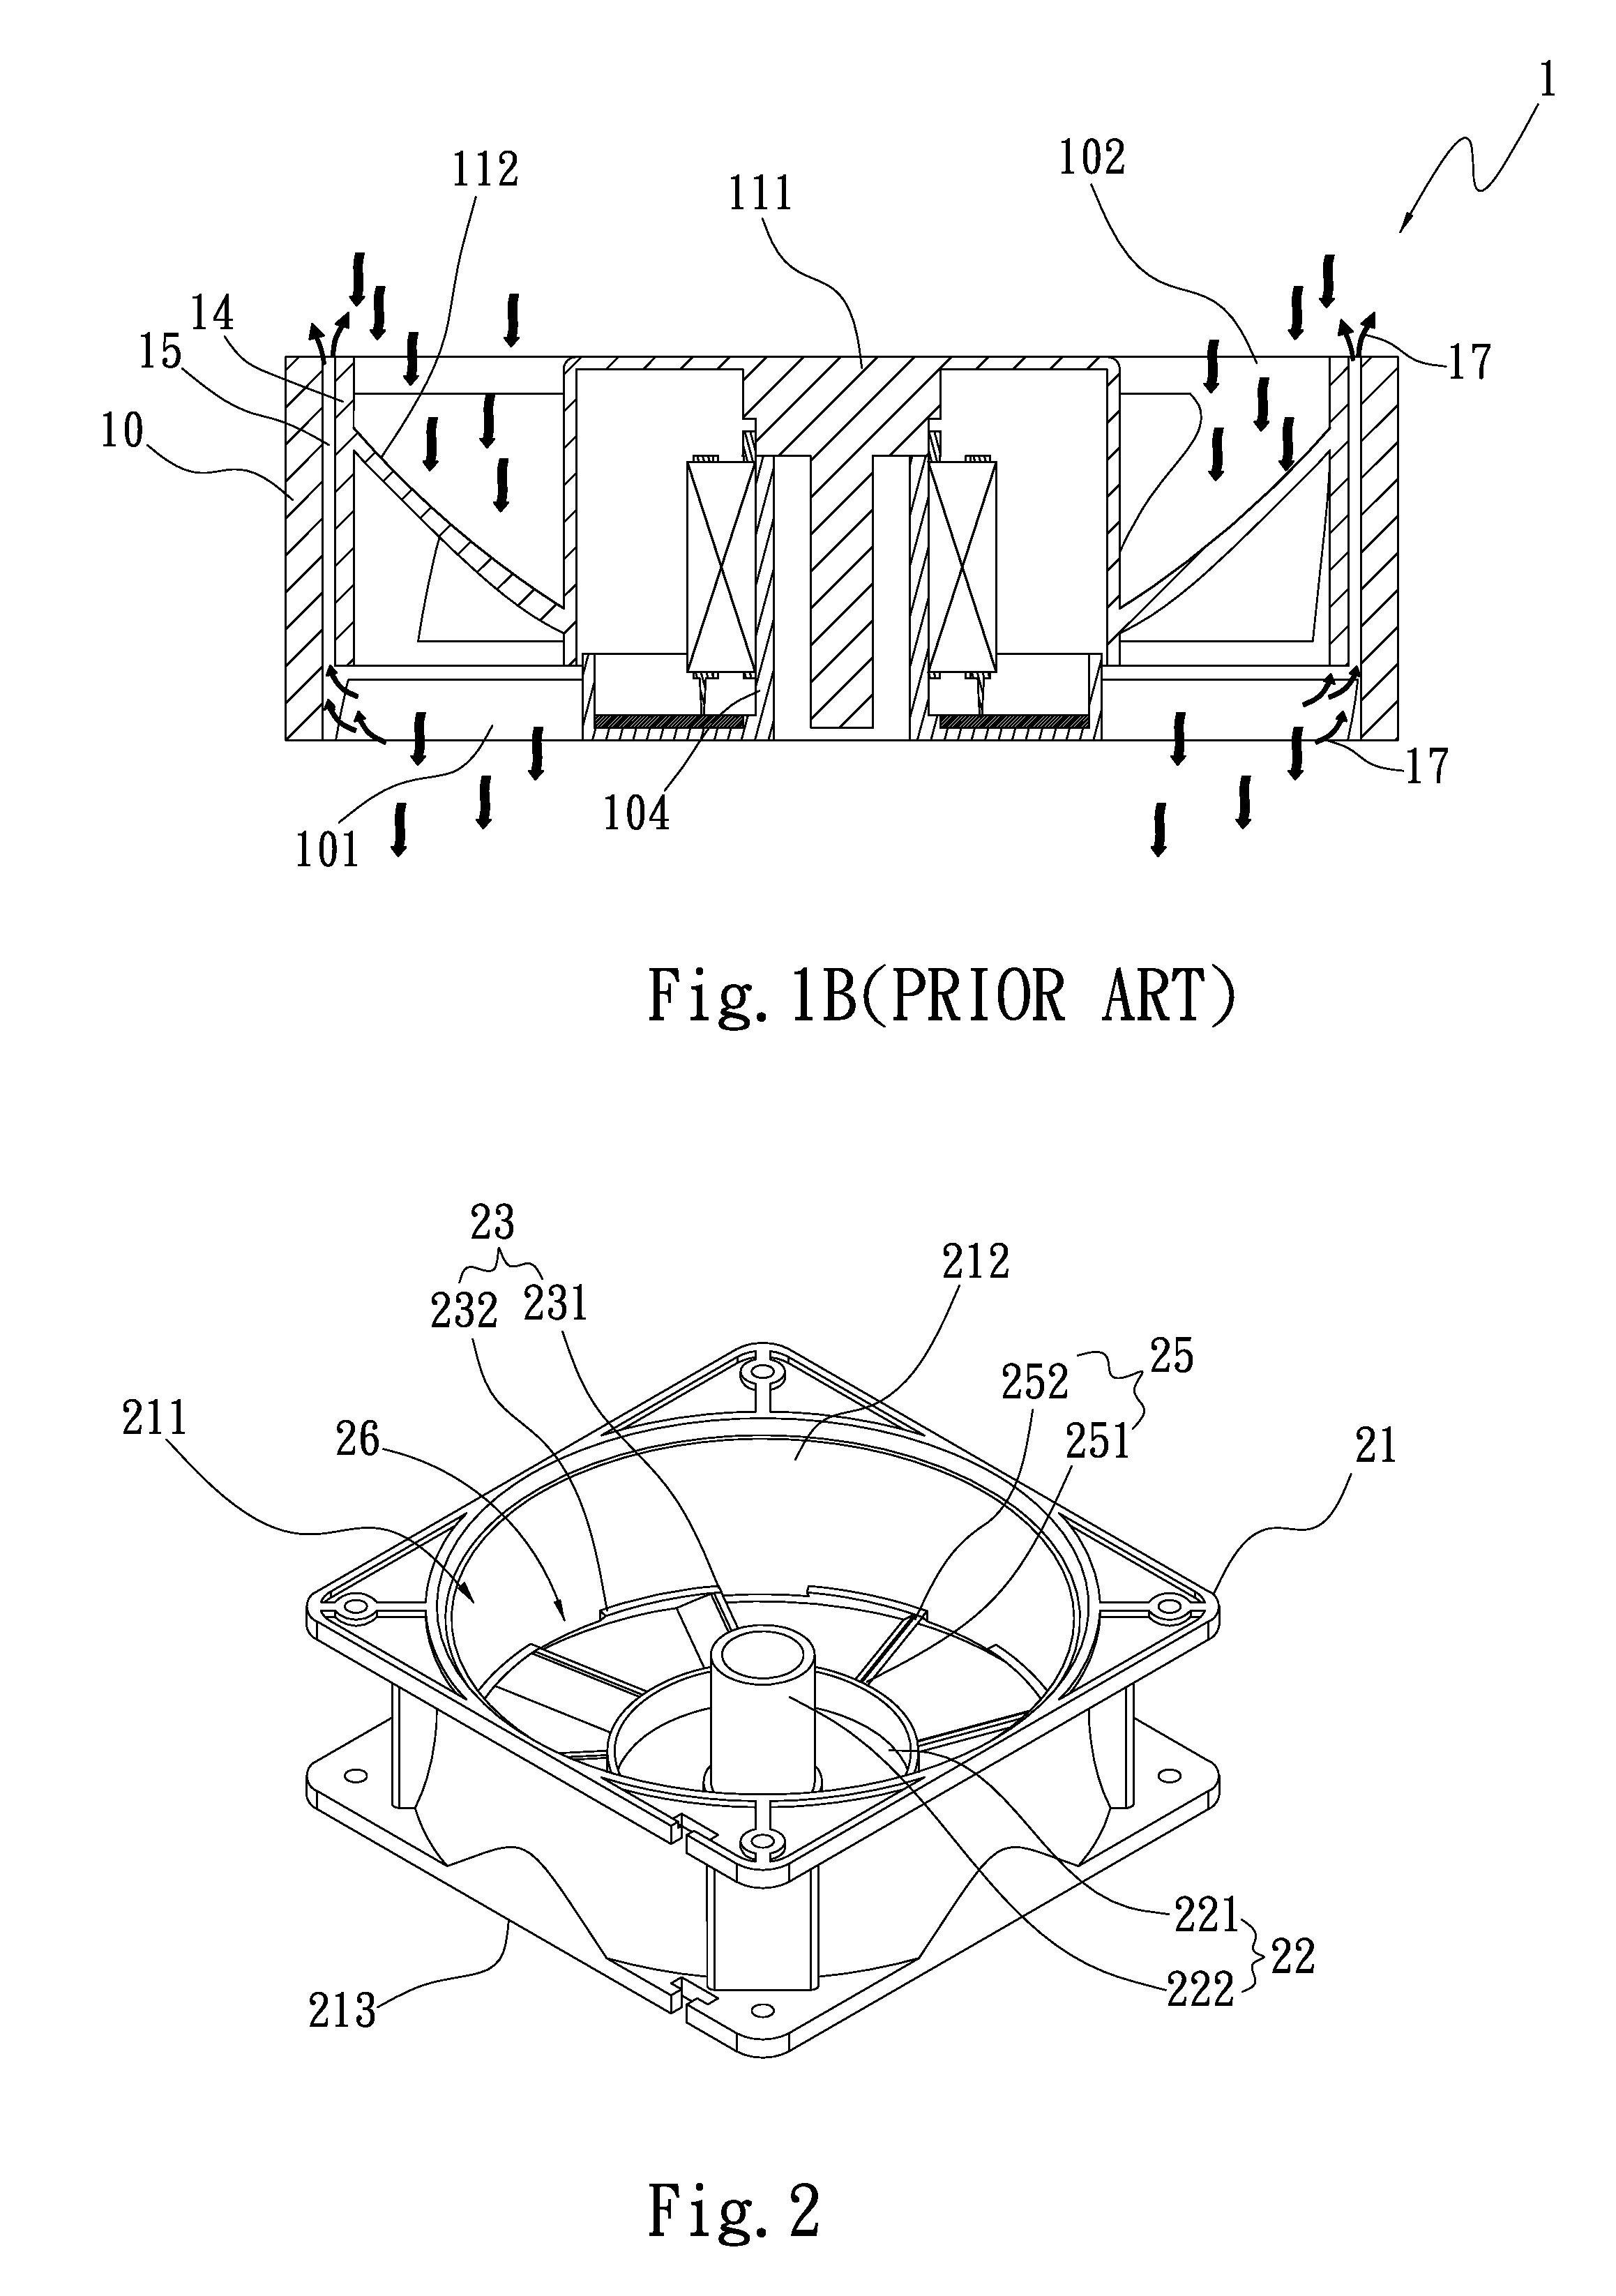 Anti-relief fan frame body structure